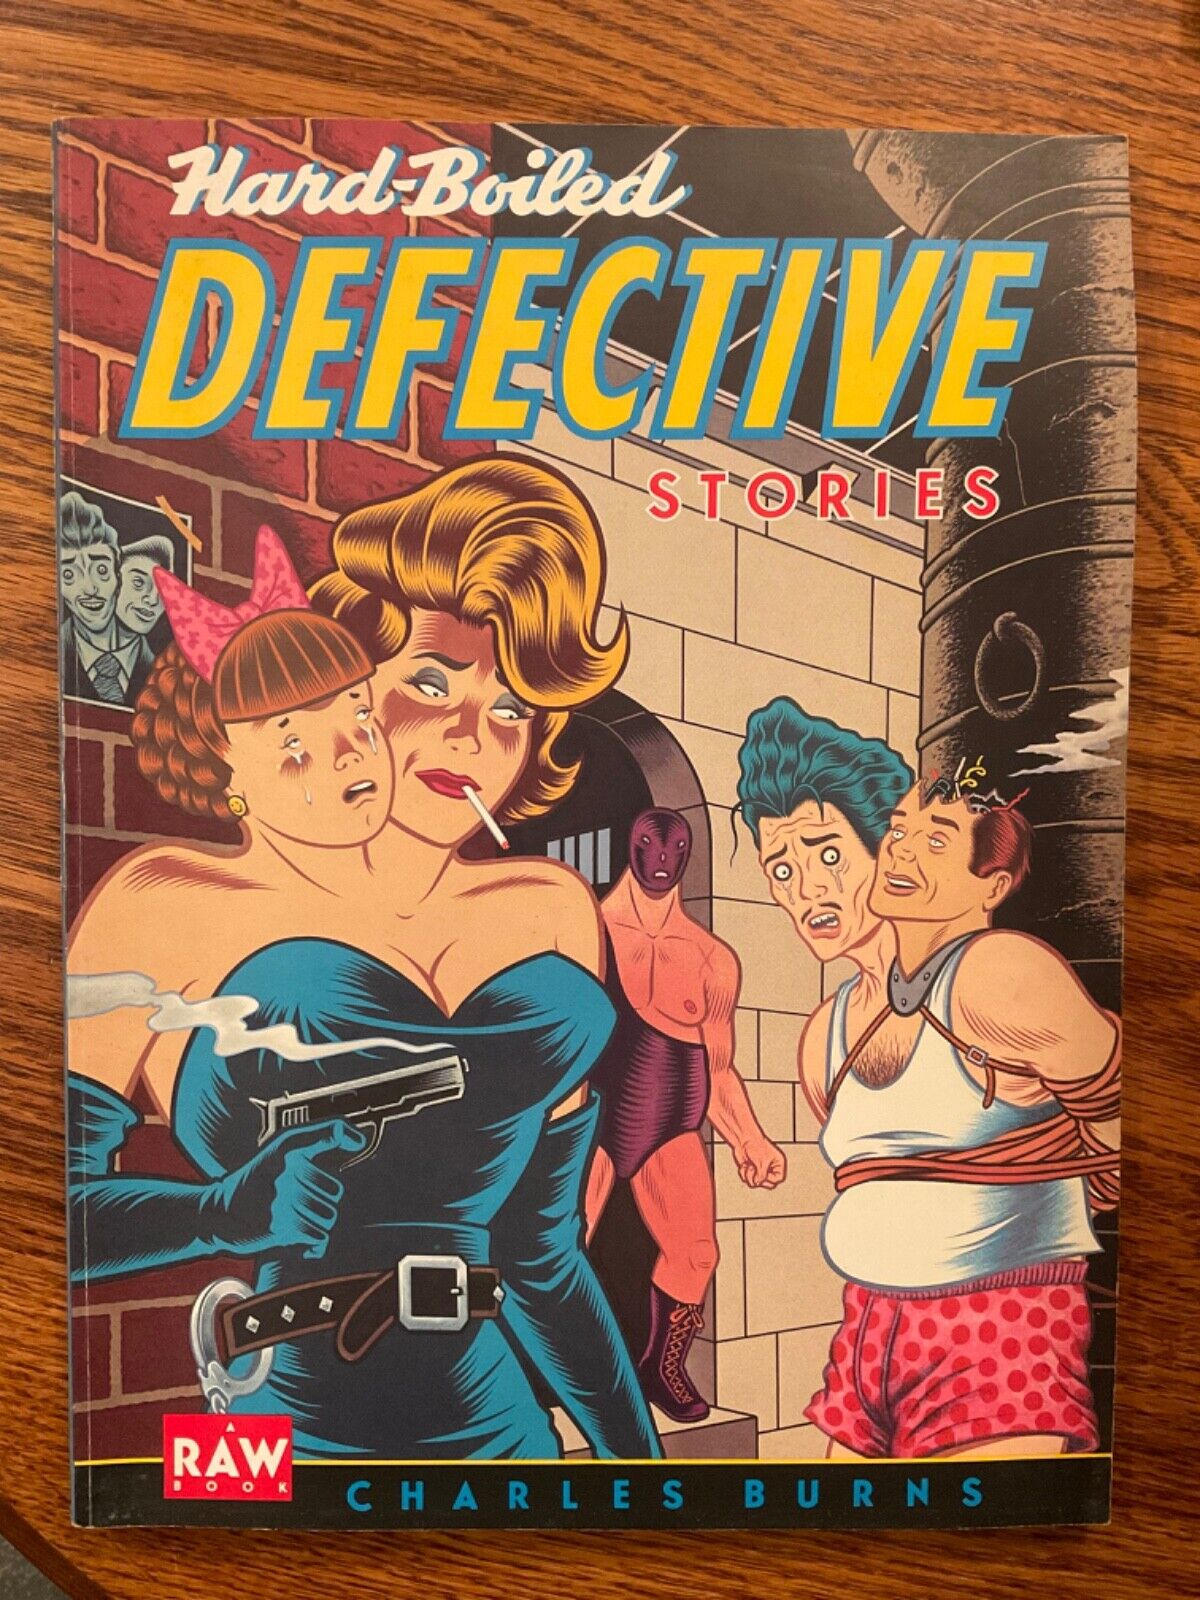 Hard-Boiled Defective Stories by Charles Burns First Edition 1988 VG+